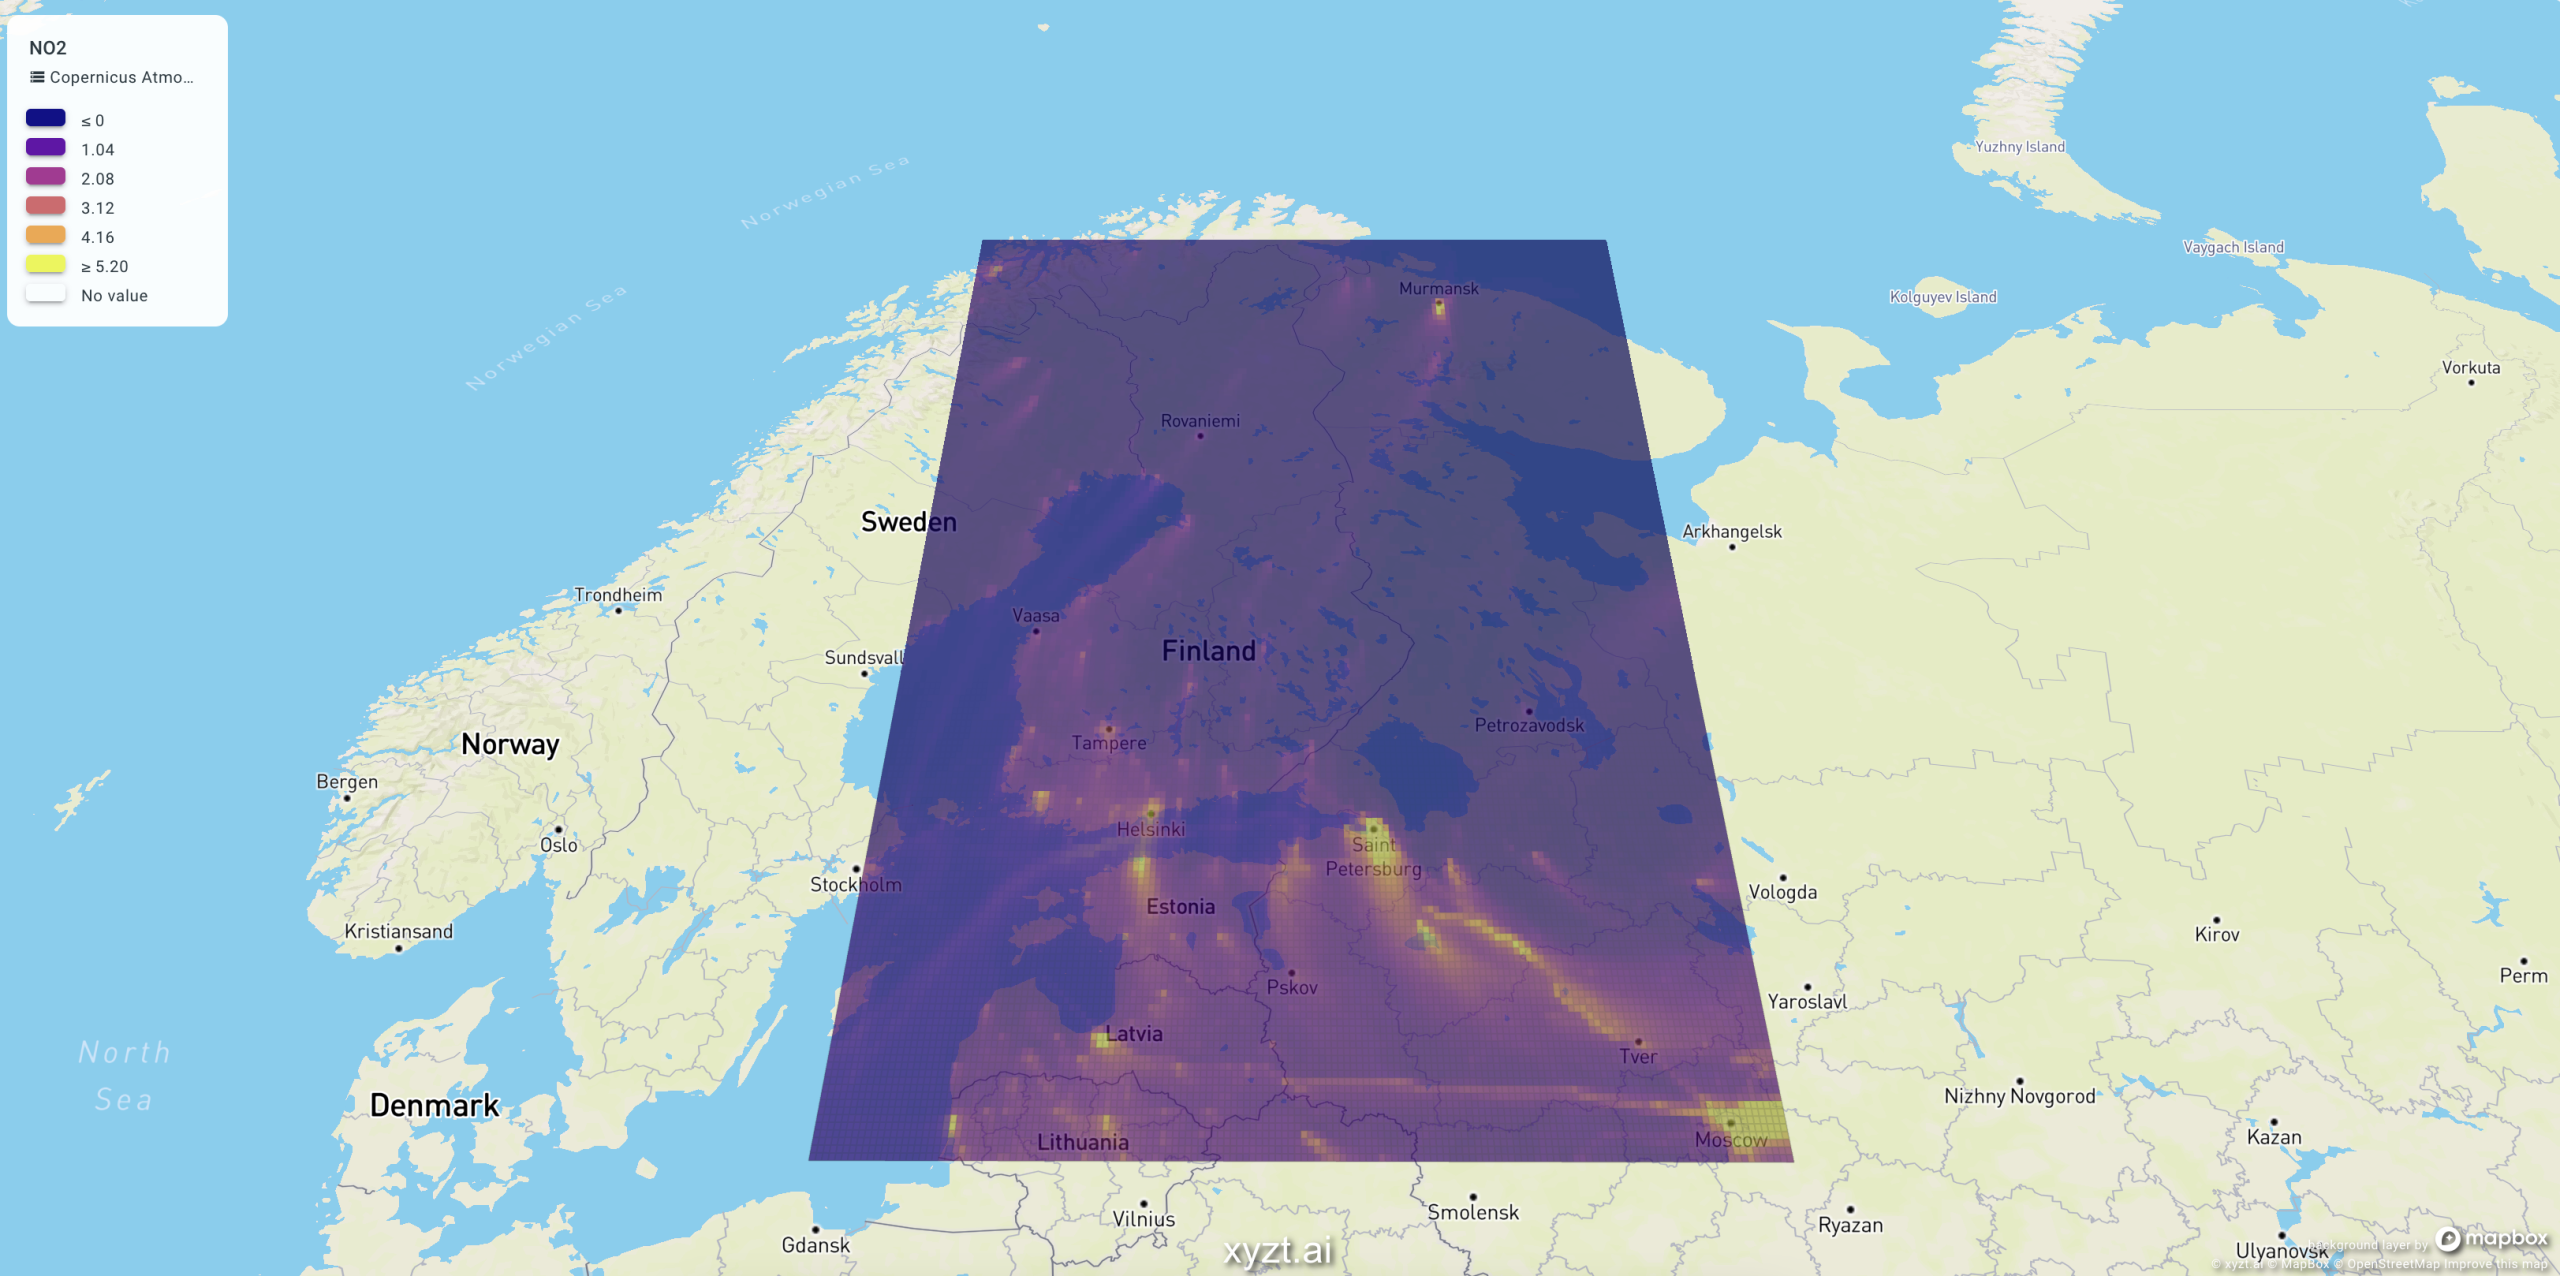 NO2 emissions in the Finland area. High emissions are seen in densely populated areas and along major roads. data from the EU Copernicus programme.